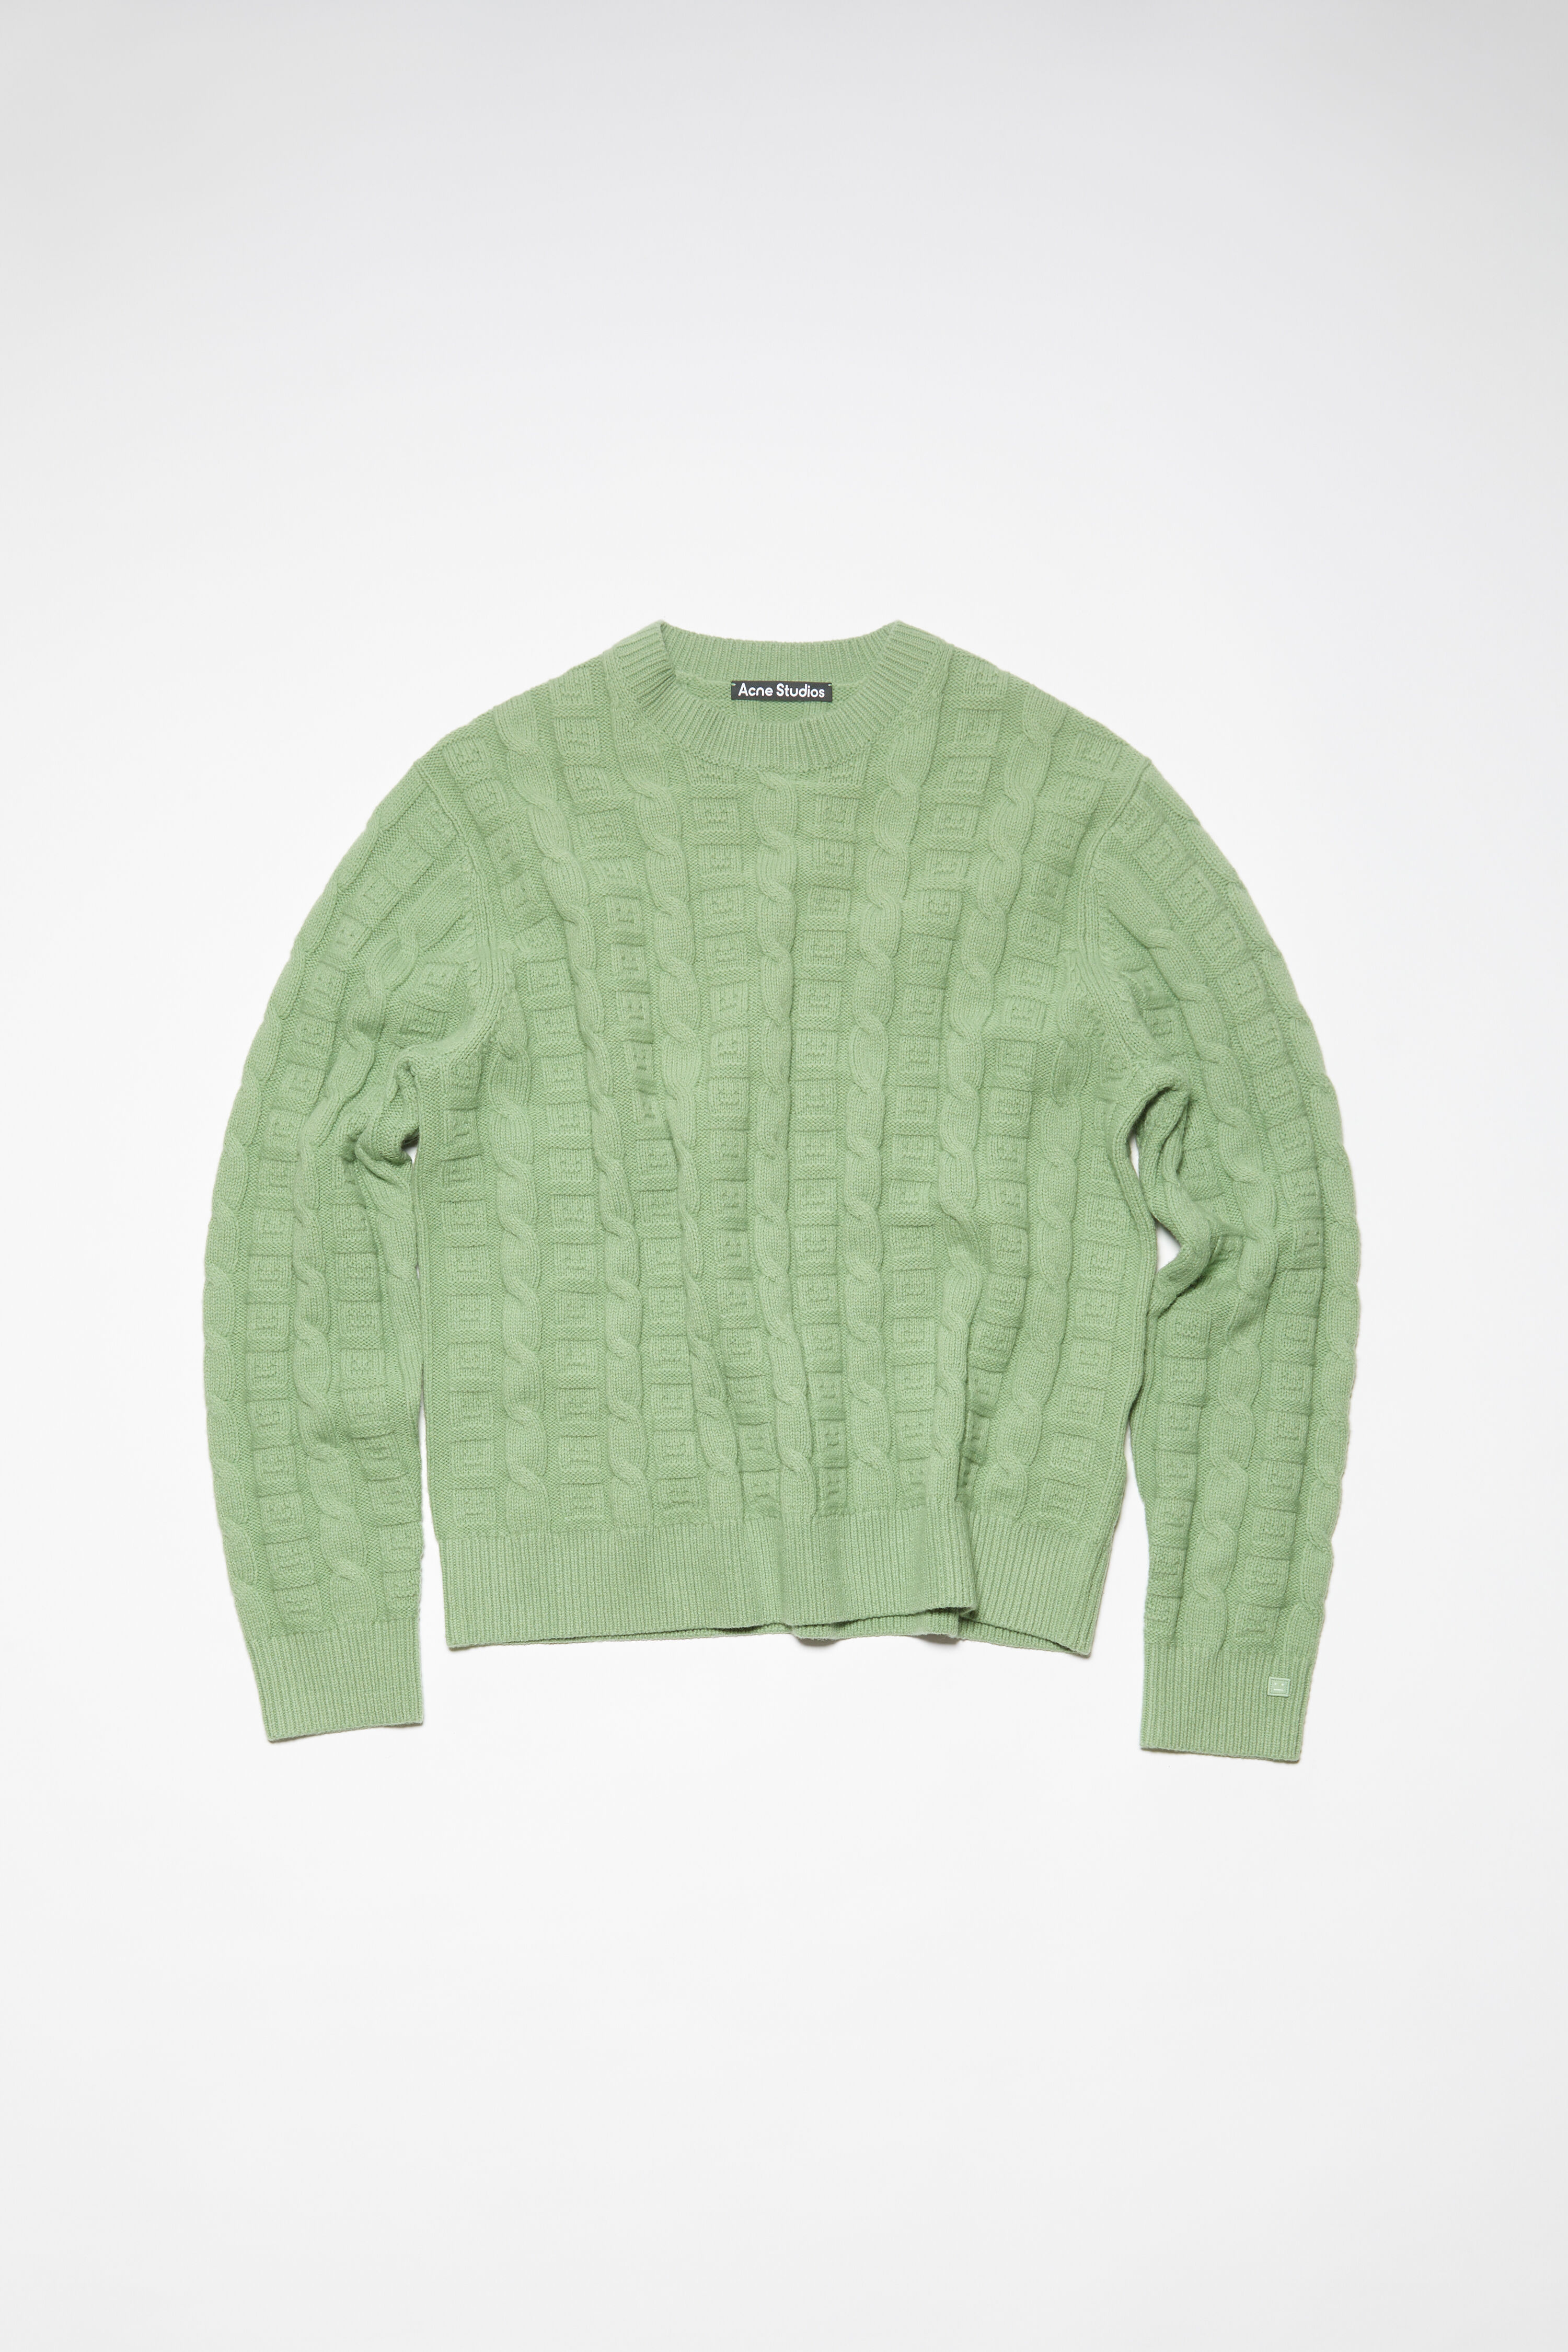 Acne Studios - Cable wool jumper - Sage green